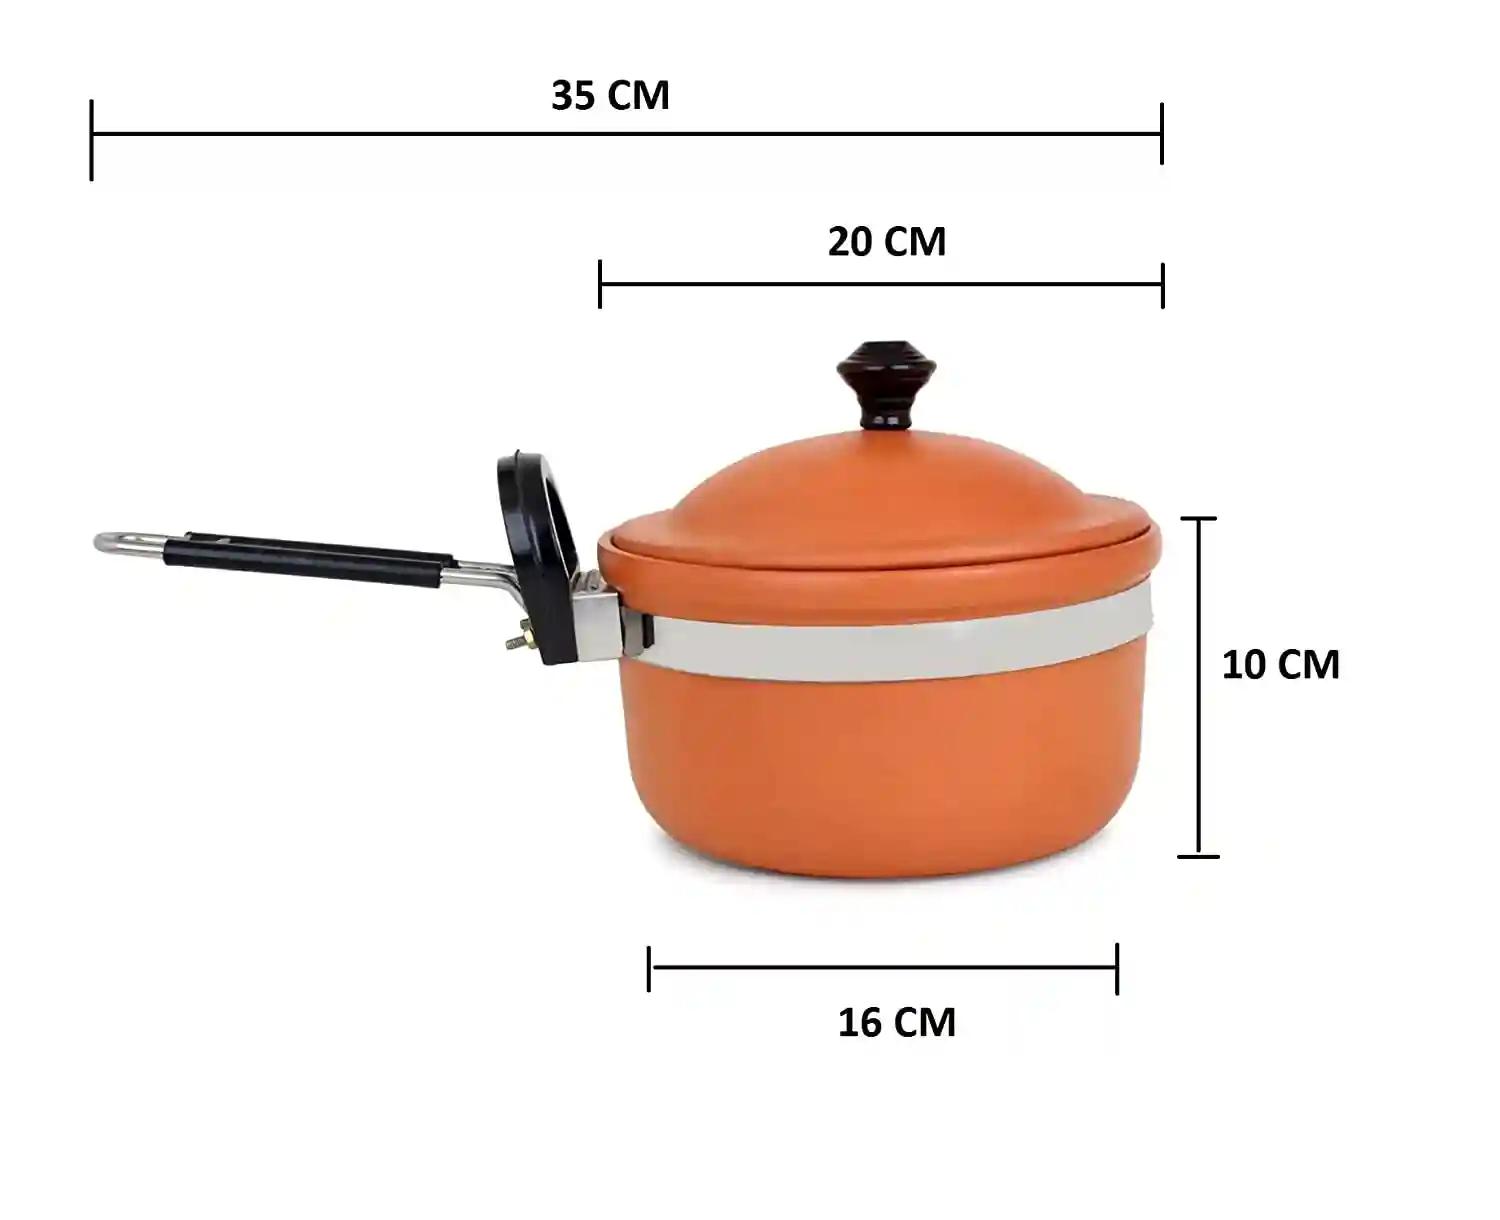 KSI Handmade Terracotta Clay Frying Pan (1.5 litres) with Lid, Eco Friendly Earthen Clay Frying Pan for Cooking and Wooden Palta Spatula